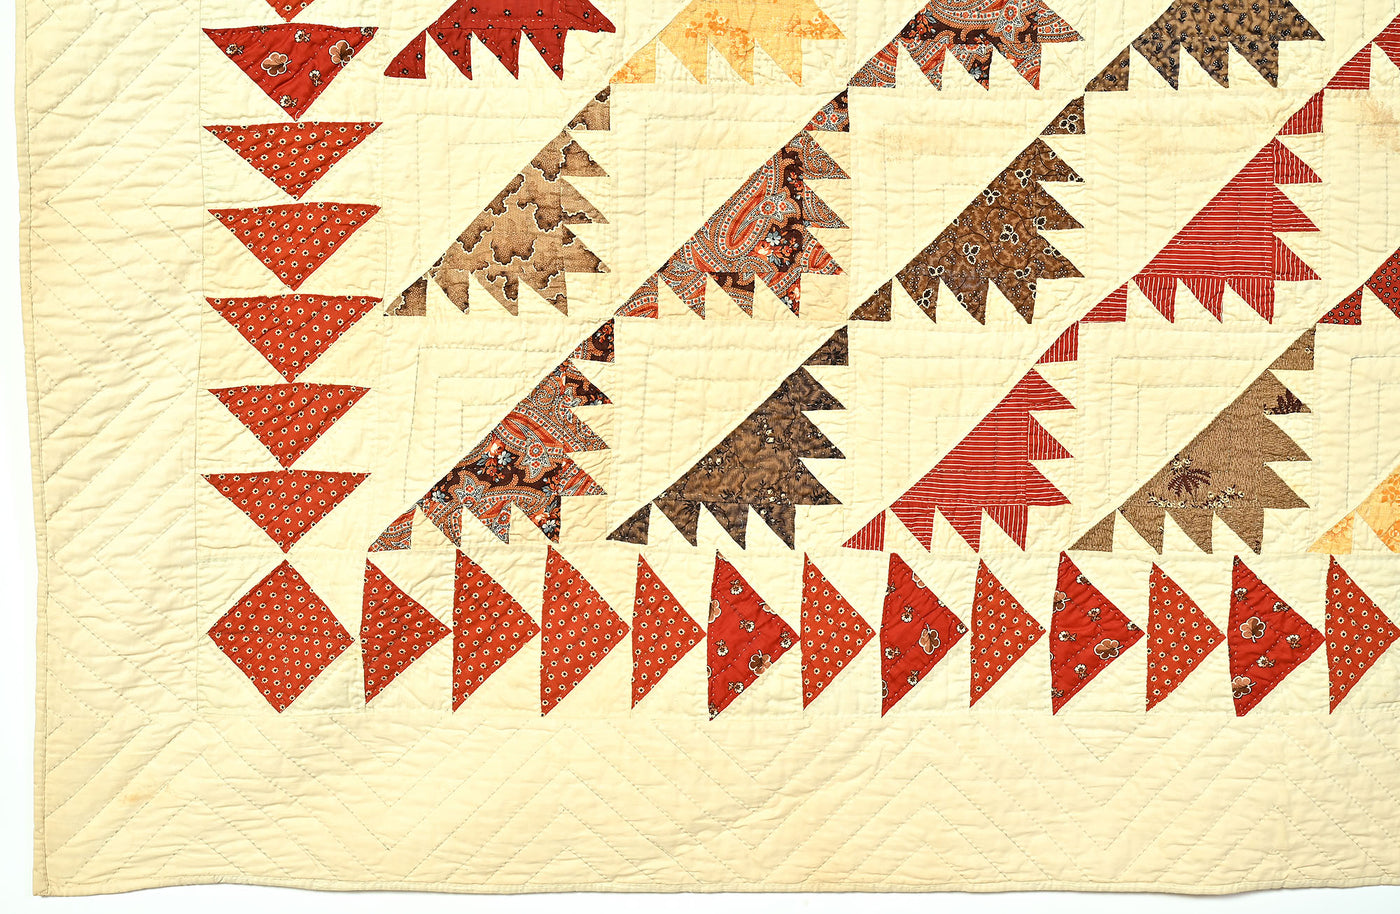 Sawtooth Quilt with Wild Goose Chase Border